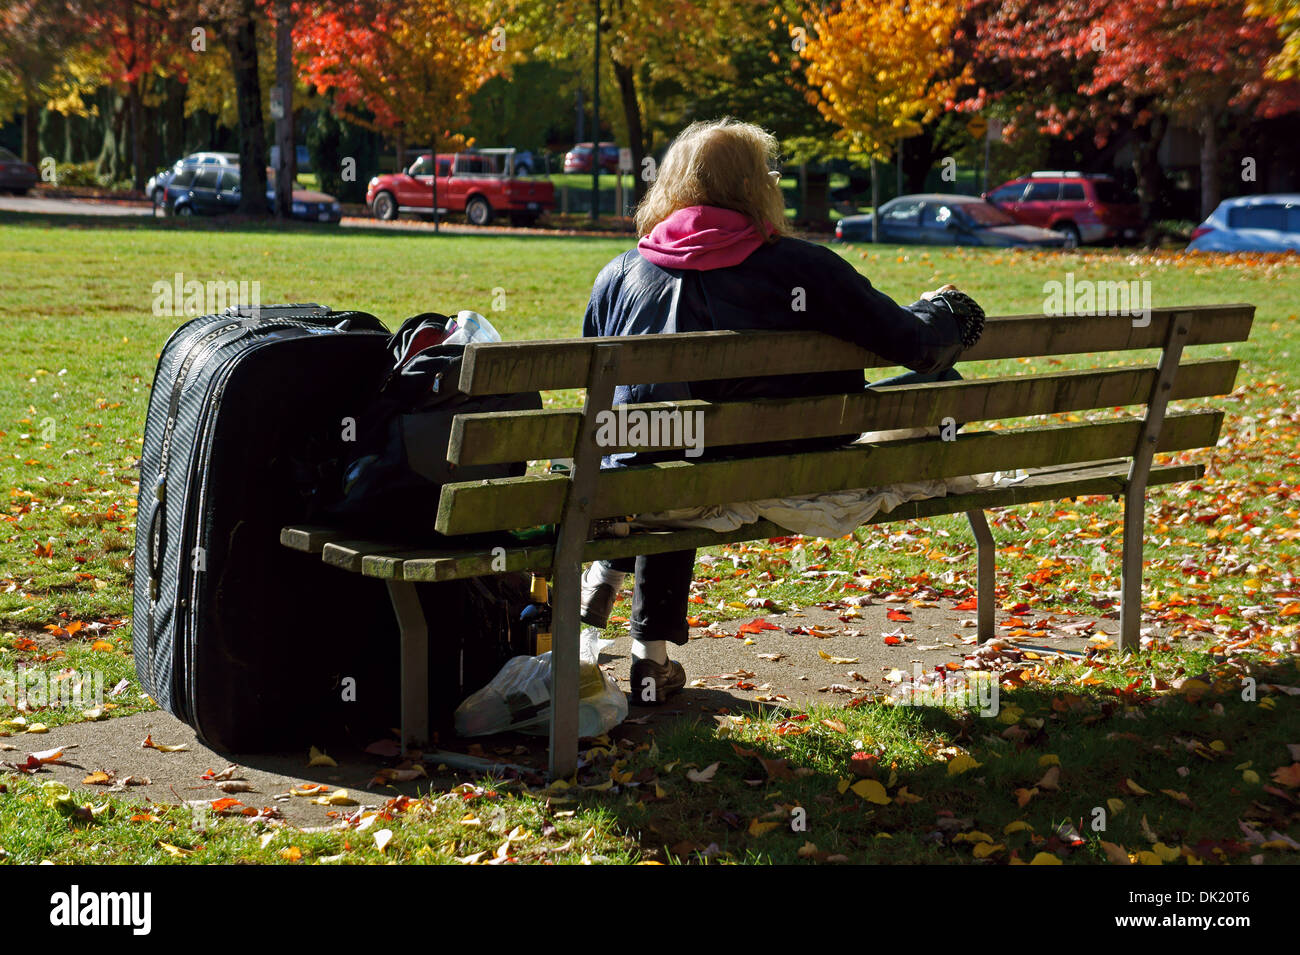 Homeless senior woman sitting on a park bench with her belongings, Vancouver, BC, Canada Stock Photo